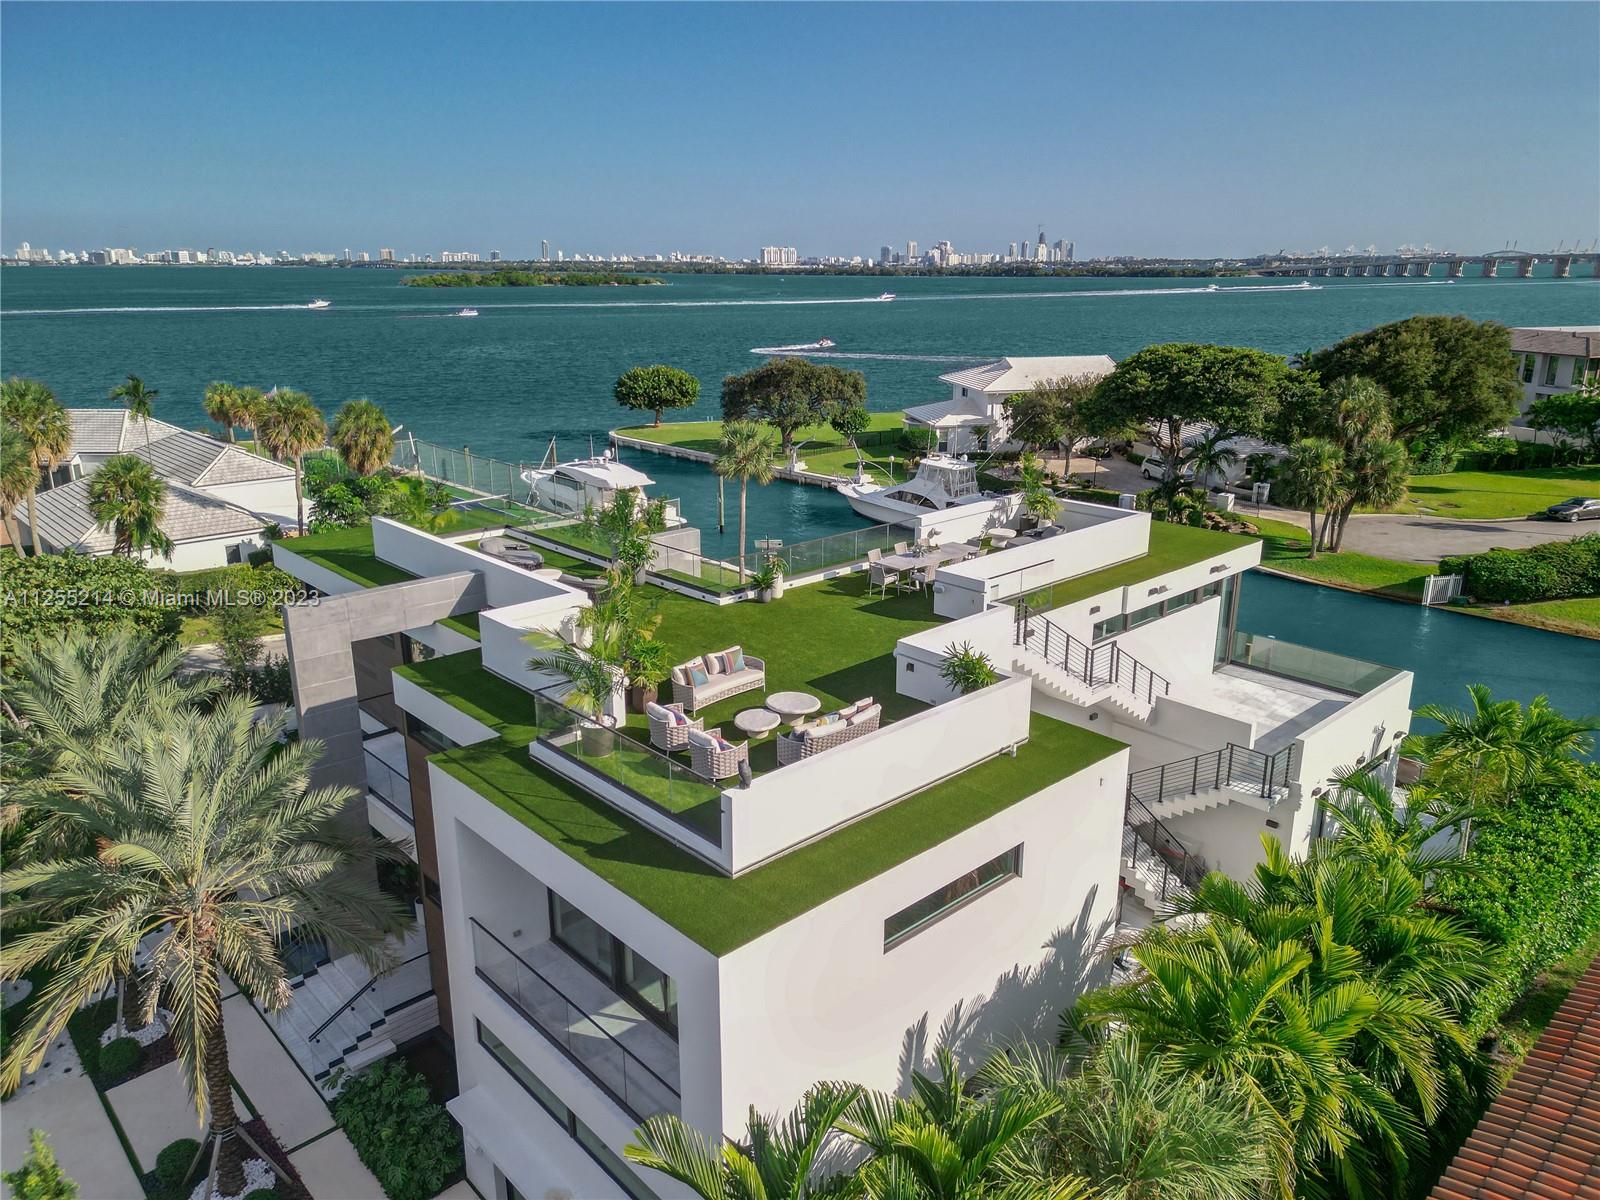 Brand new! CASA MODERNE! Truly modern tropical waterfront masterpiece privately located at the end of a cul-de-sac in Bay Point, Miami’s most secluded true gated community. This stunning new construction boasts the
only approved rooftop terrace in this exclusive community with breath-taking 360 degrees of unobstructed views of the bay & Miami's skyline. On its way to completion, this custom-built home has ultra-high-end finishes magnificently accentuated with natural stones, drop ceilings, floor-to-ceiling impact glass doors, floating staircase, Italian glass doors, state-of-the-art kitchen, see-through wine cellar, fireplace, elevator and lapping pool. All suite bedrooms with balconies and panoramic views. Ideal for those who like to entertain & experience the best.
lifestyle in Miami